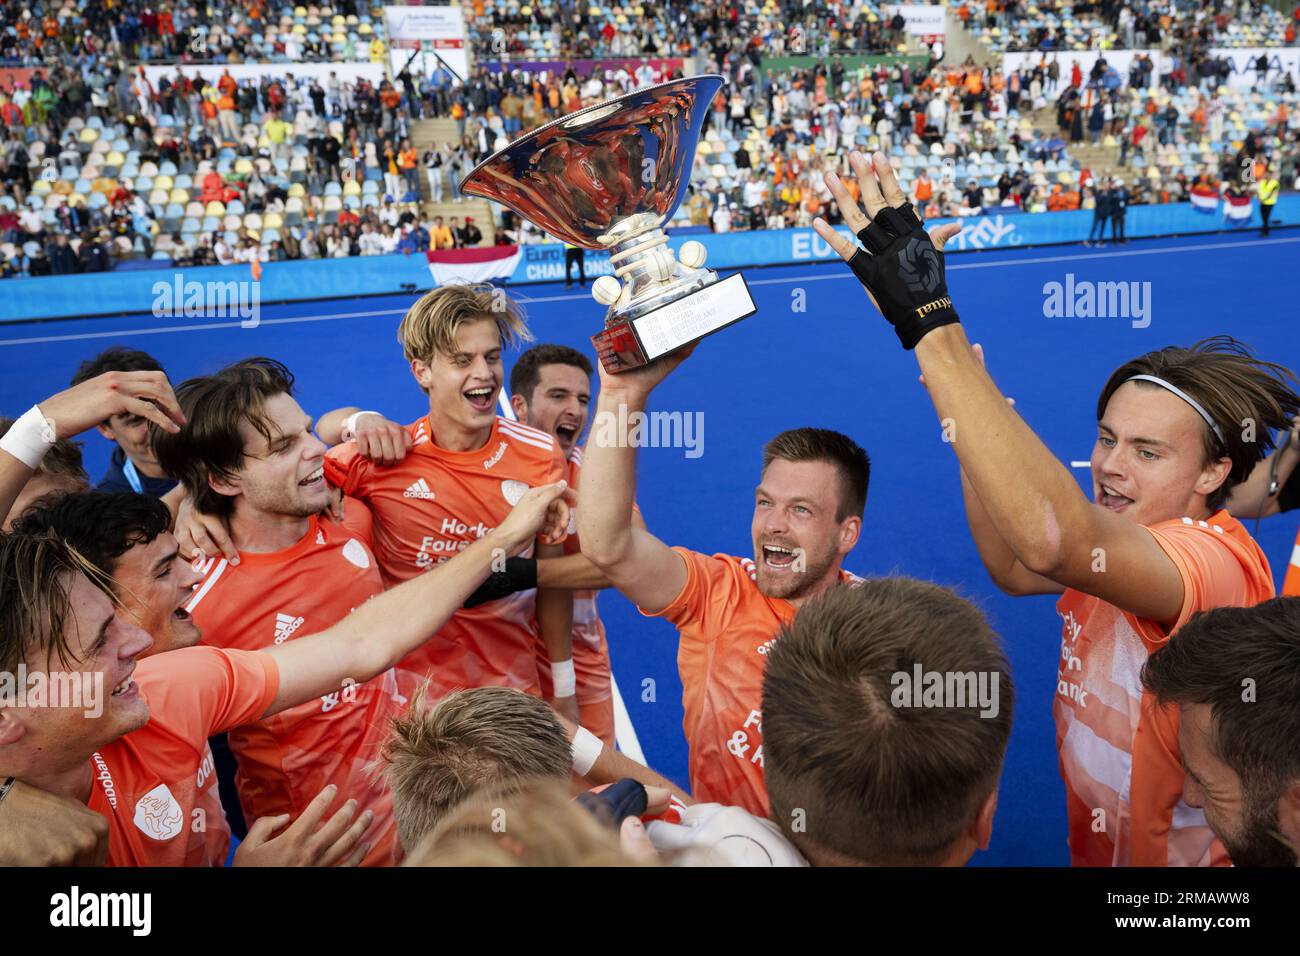 MONCHENGLADBACH - Thierry Brinkman of the Netherlands with the cup. The  men's hockey team became European champion by beating England 2-1 in the  final at the European Hockey Championship and thus qualified